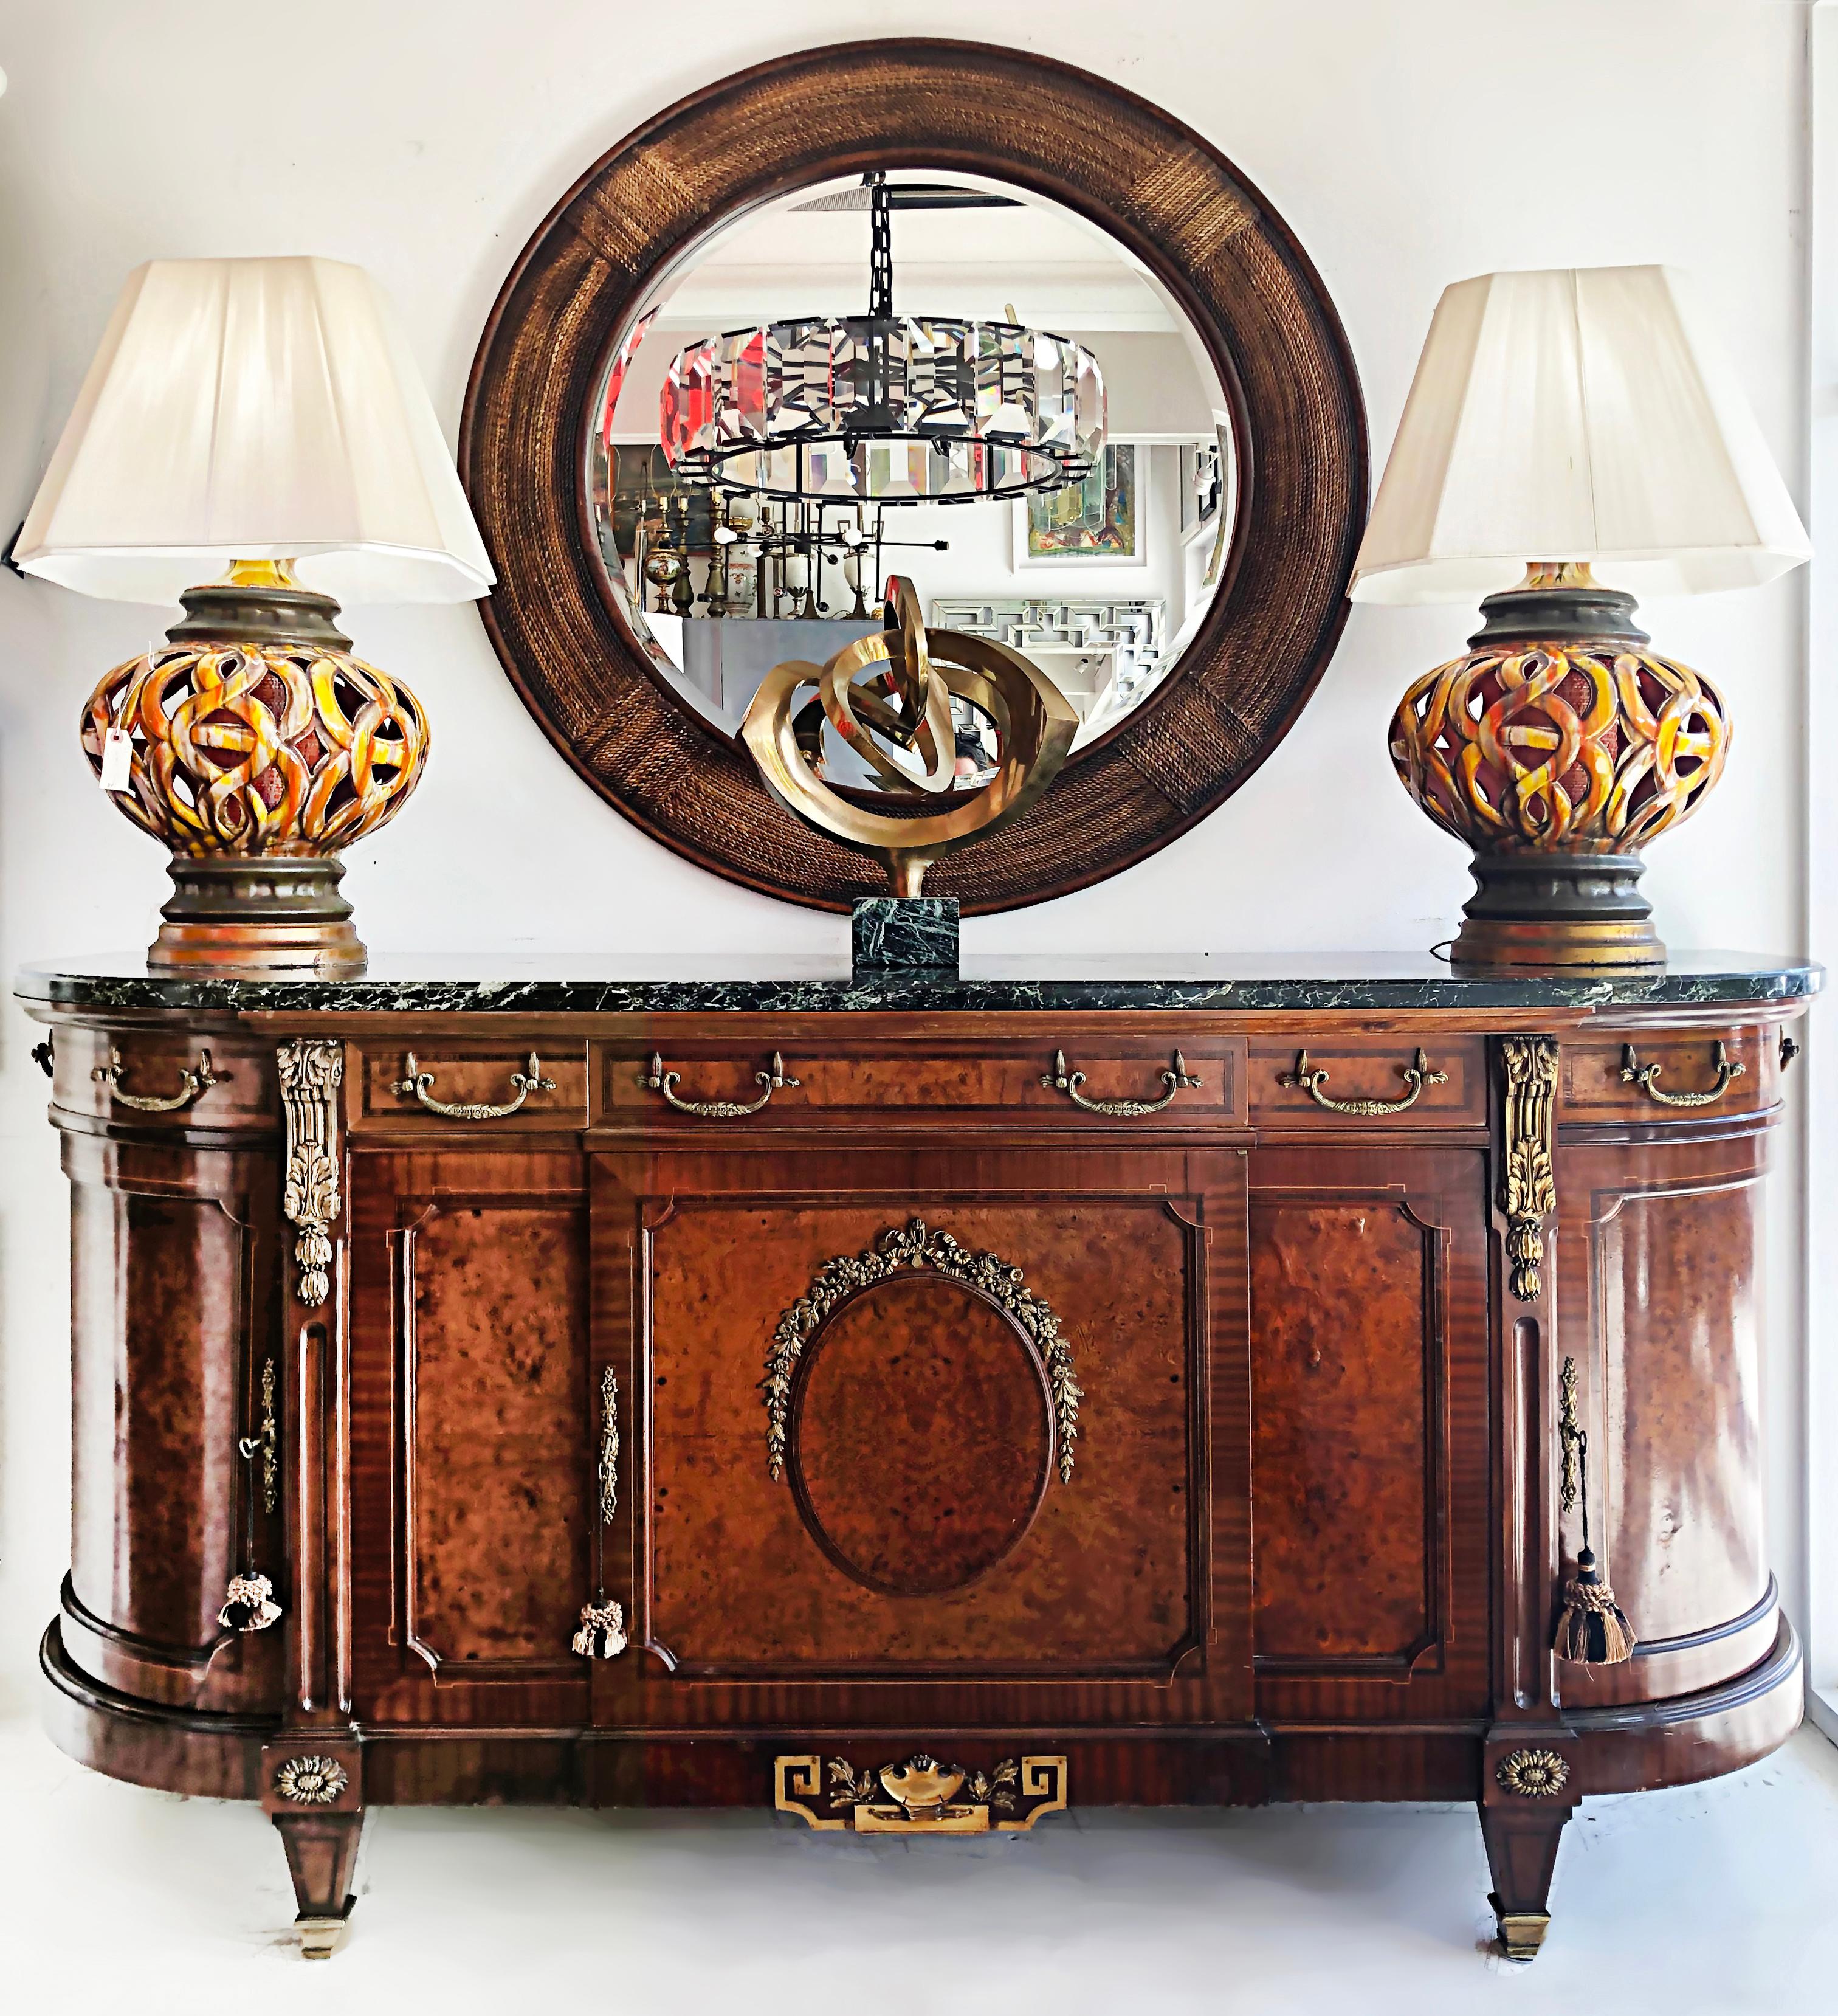 French Empire neoclassical burl Buffet, Marble, gilt bronze mounts

Offered for sale is a substantial turn of the last century antique French Empire Neoclassical-influenced buffet that is topped in marble and adorned with gilt bronze mounts. The